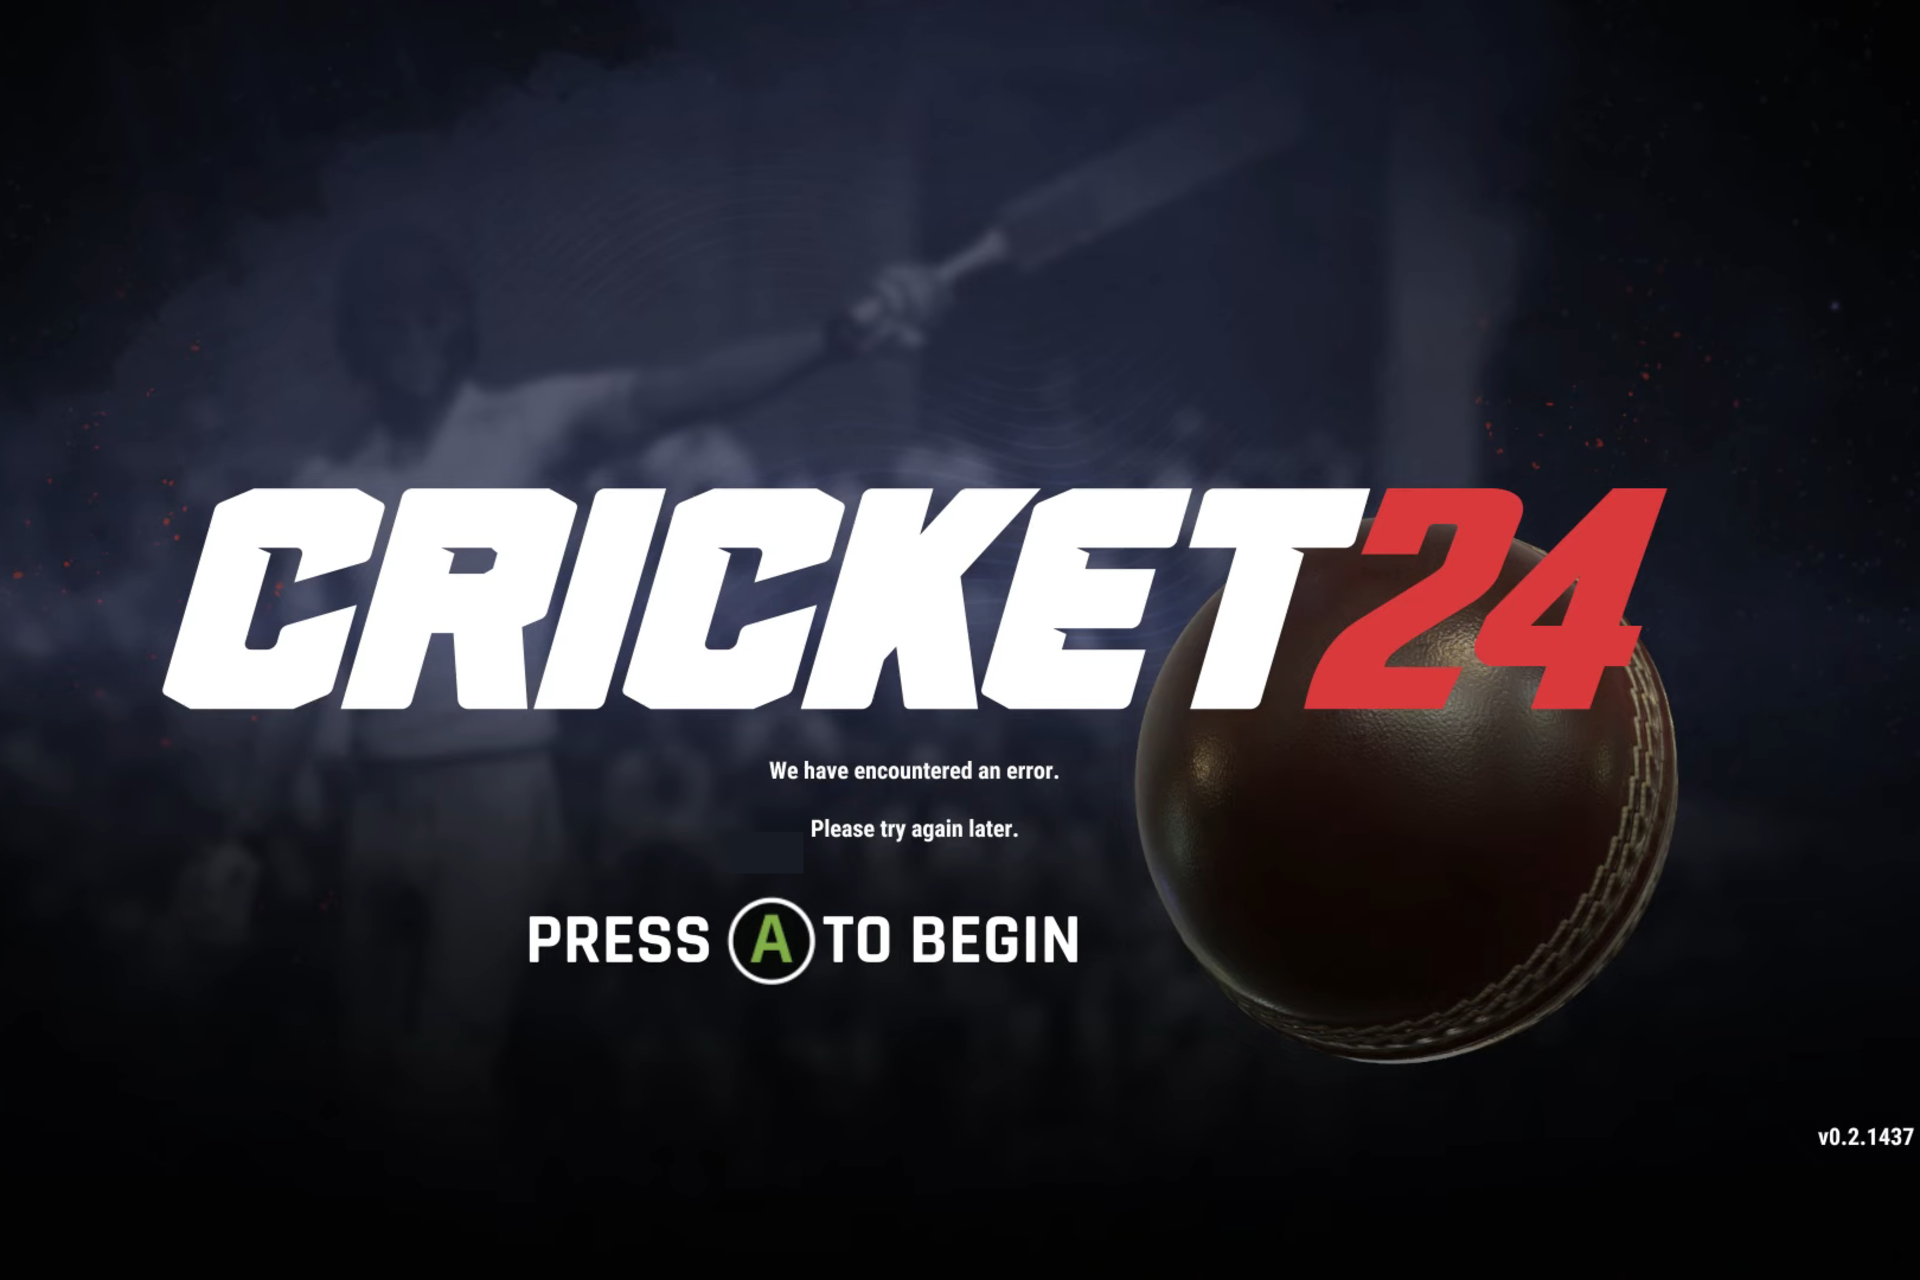 fix we have encountered an error in cricket 24